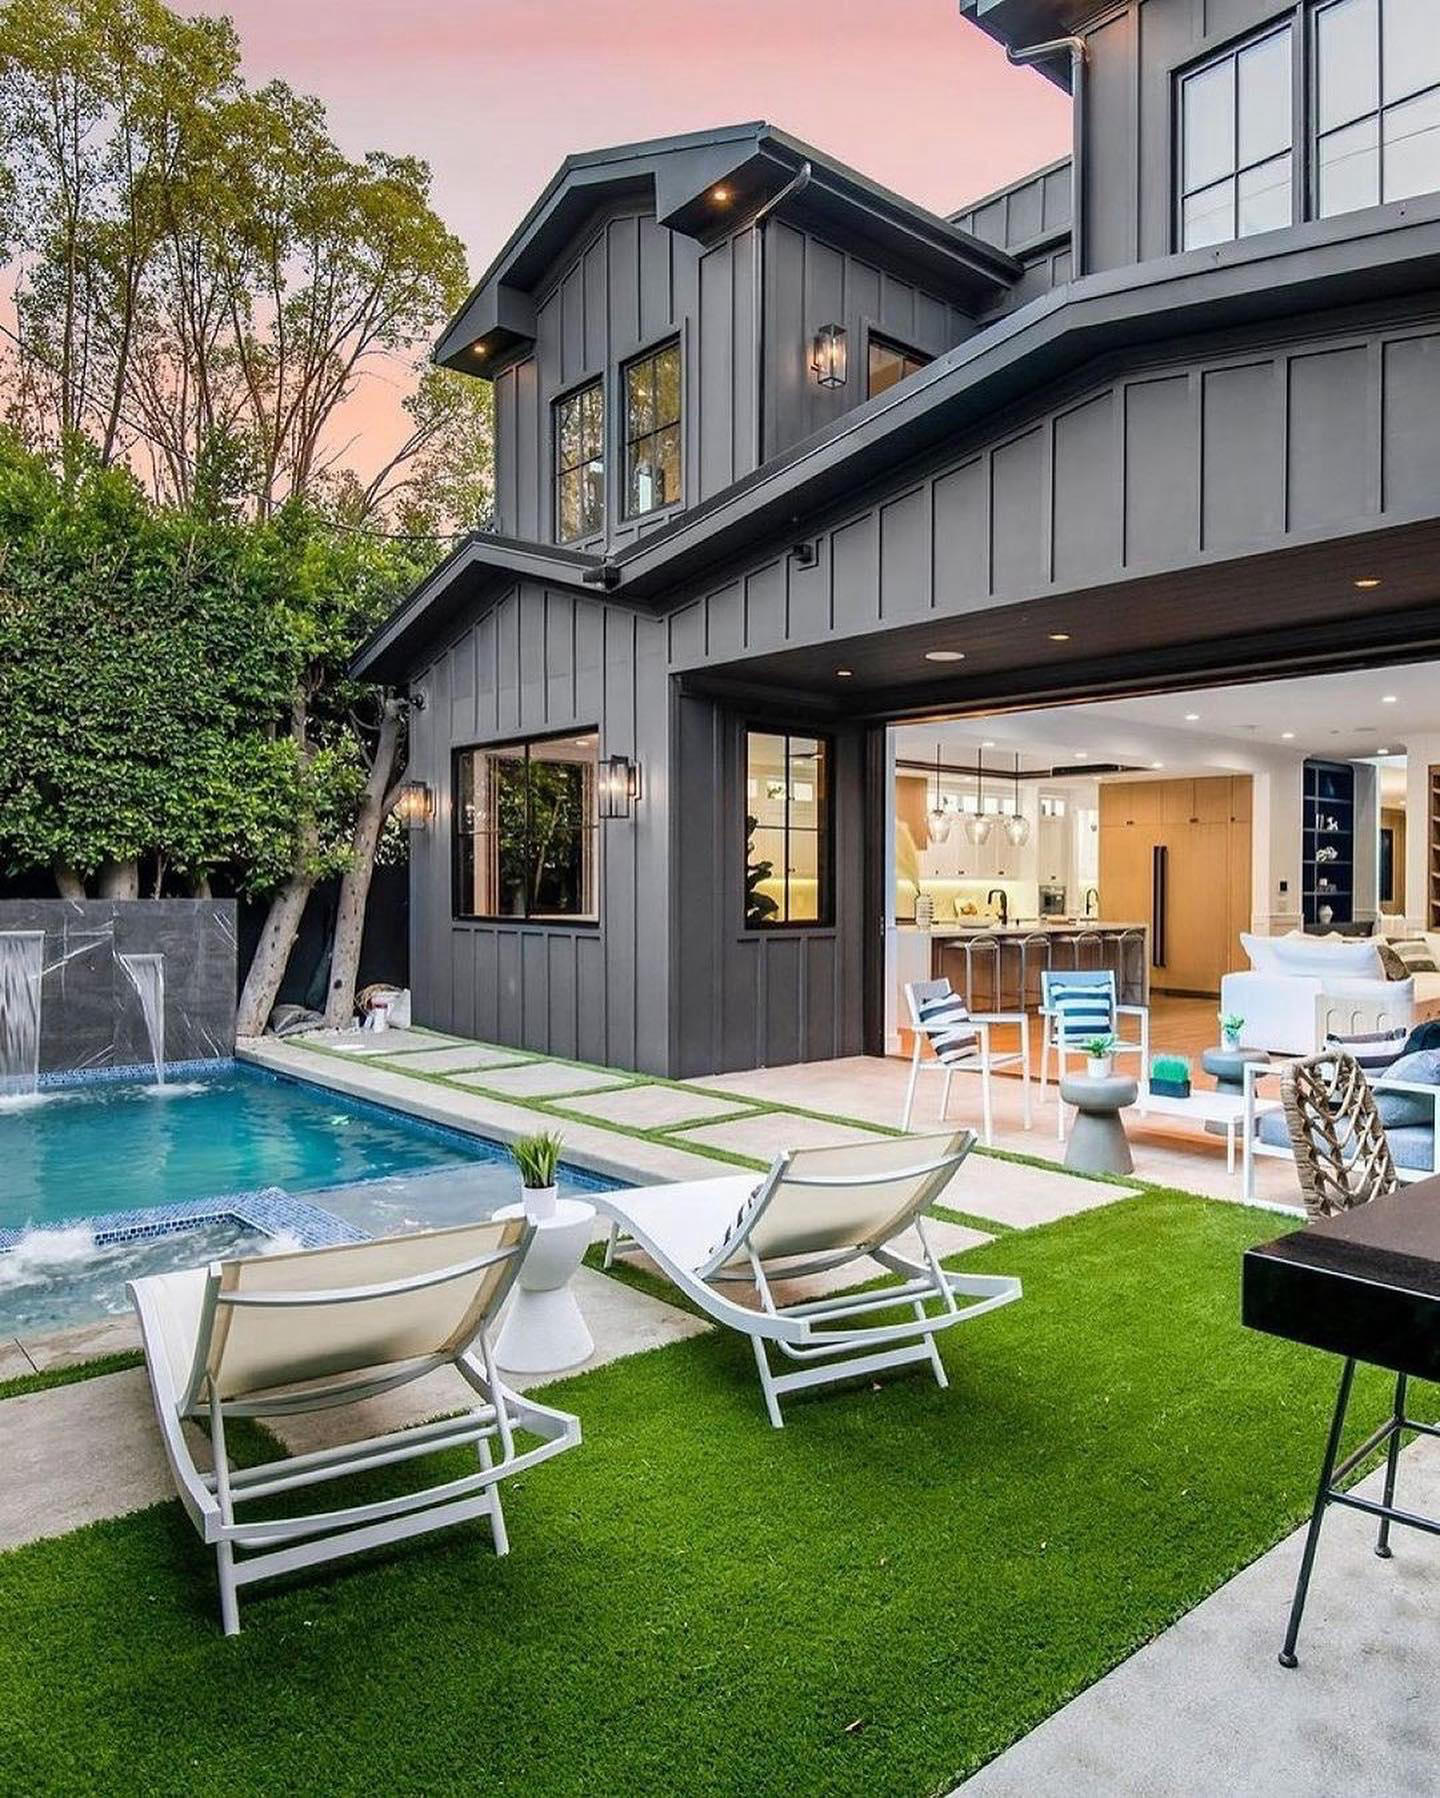 Millionaire Homes - Situated behind gates in prime Beverly Grove, this new, 5-bedroom residence show